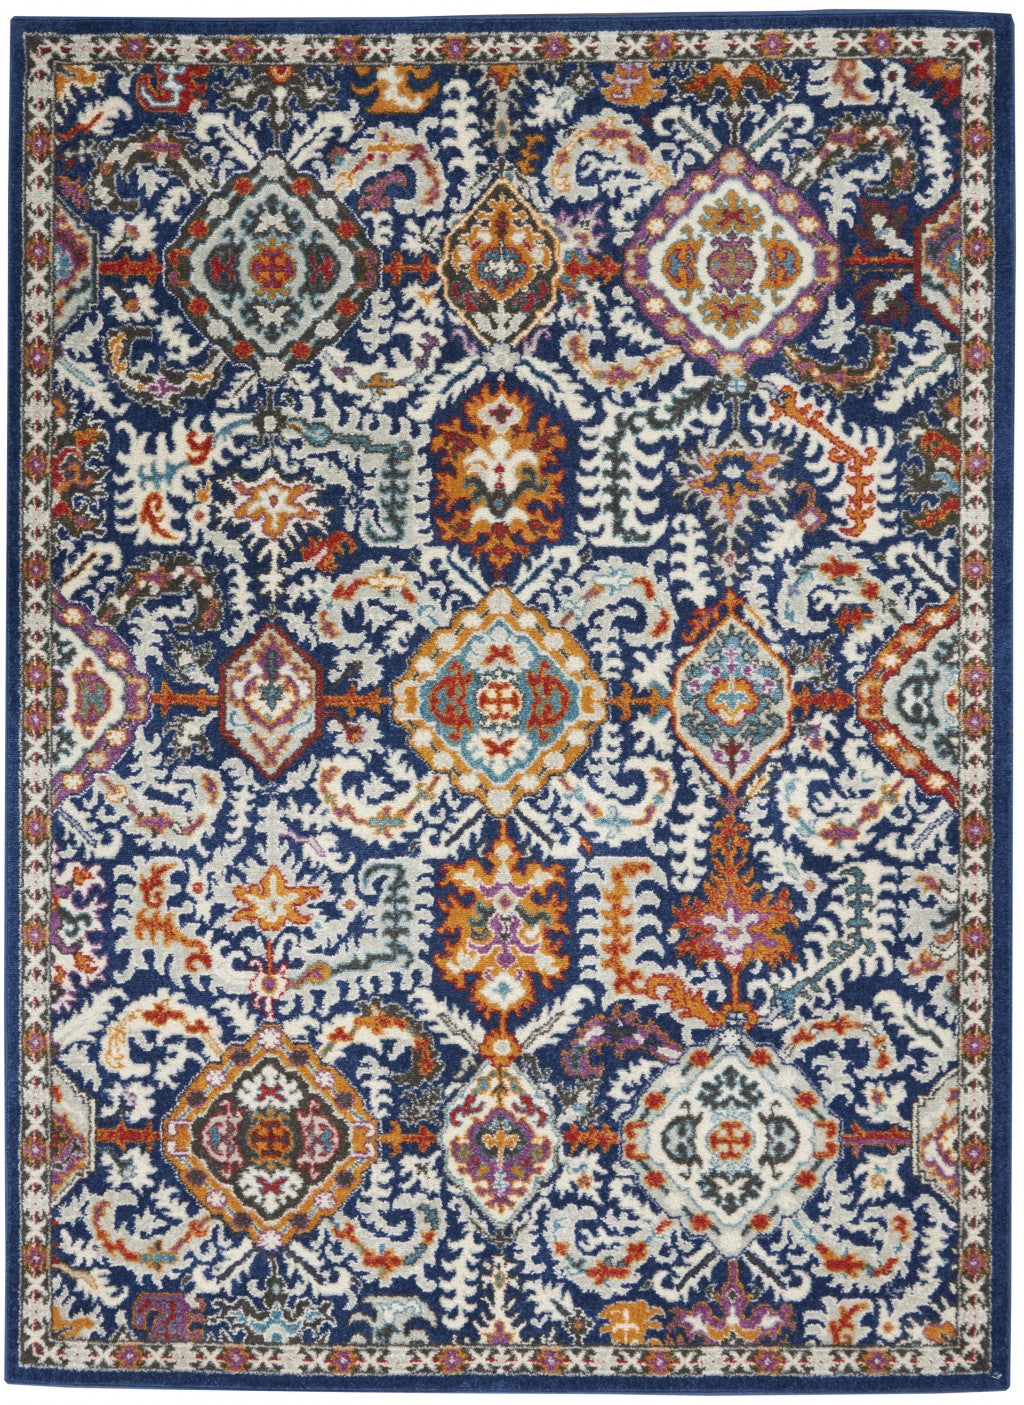 2' X 3' Blue And Ivory Power Loom Area Rug